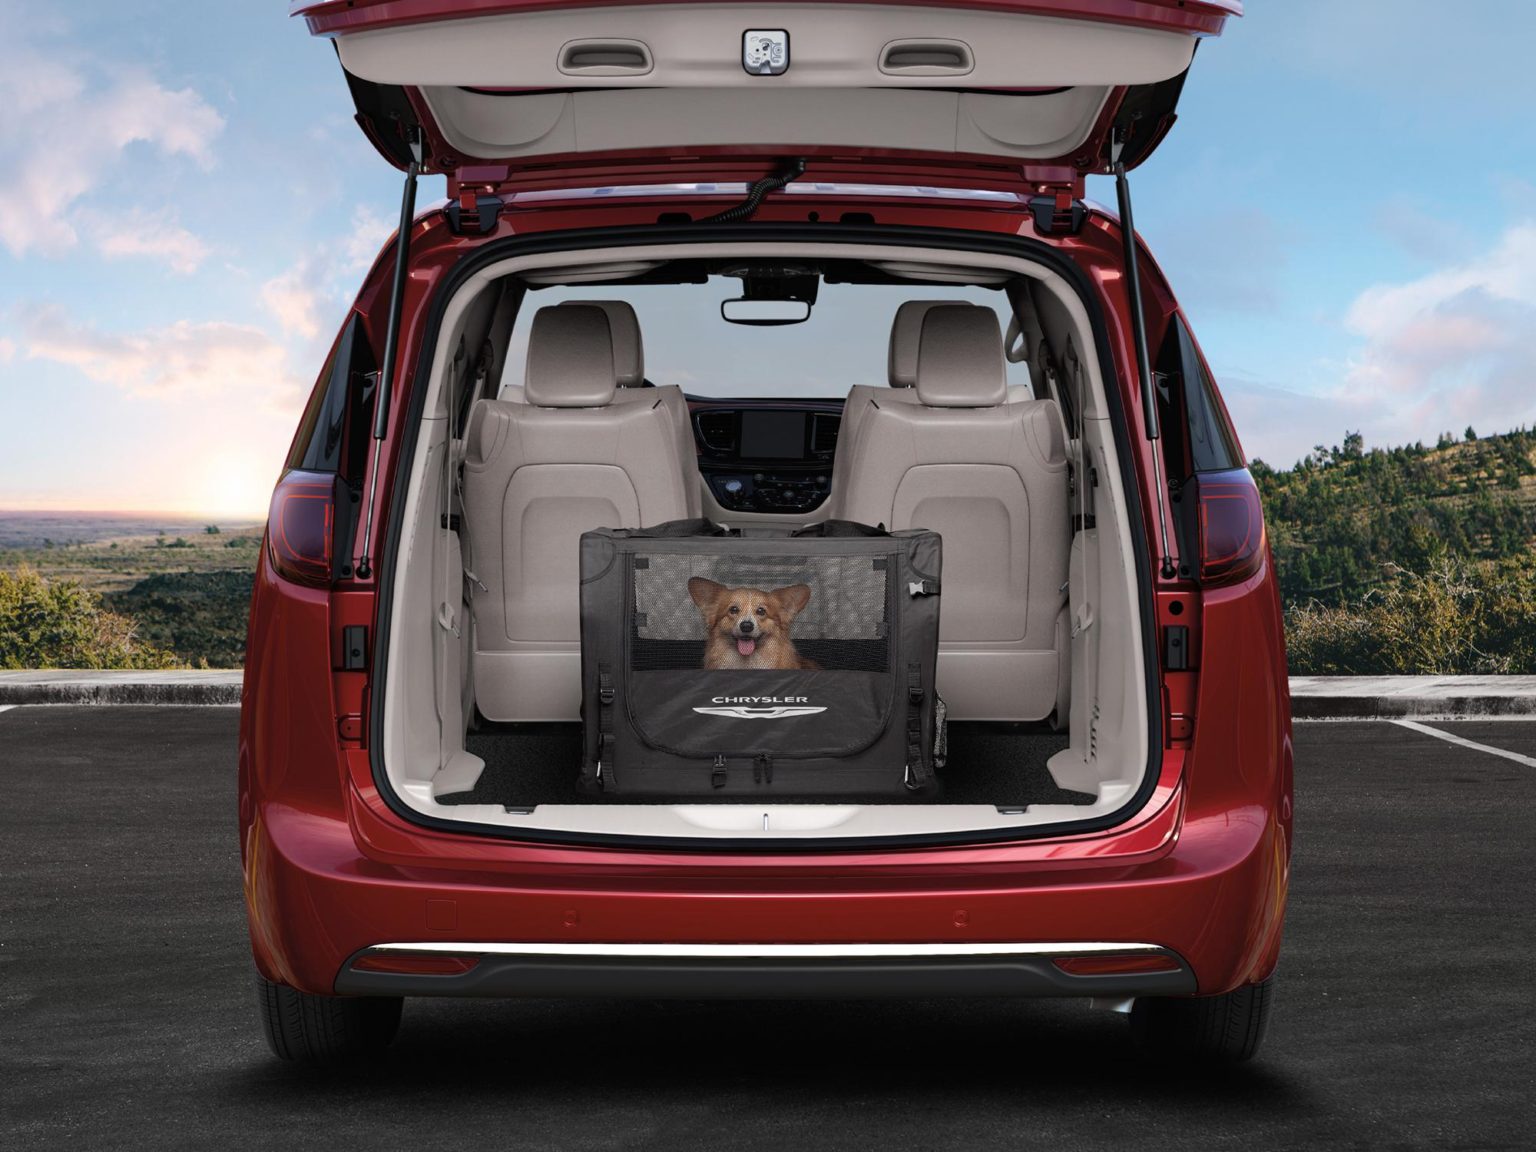 The refreshed Chrysler Pacifica is now available with a new roster of Mopar accessories.